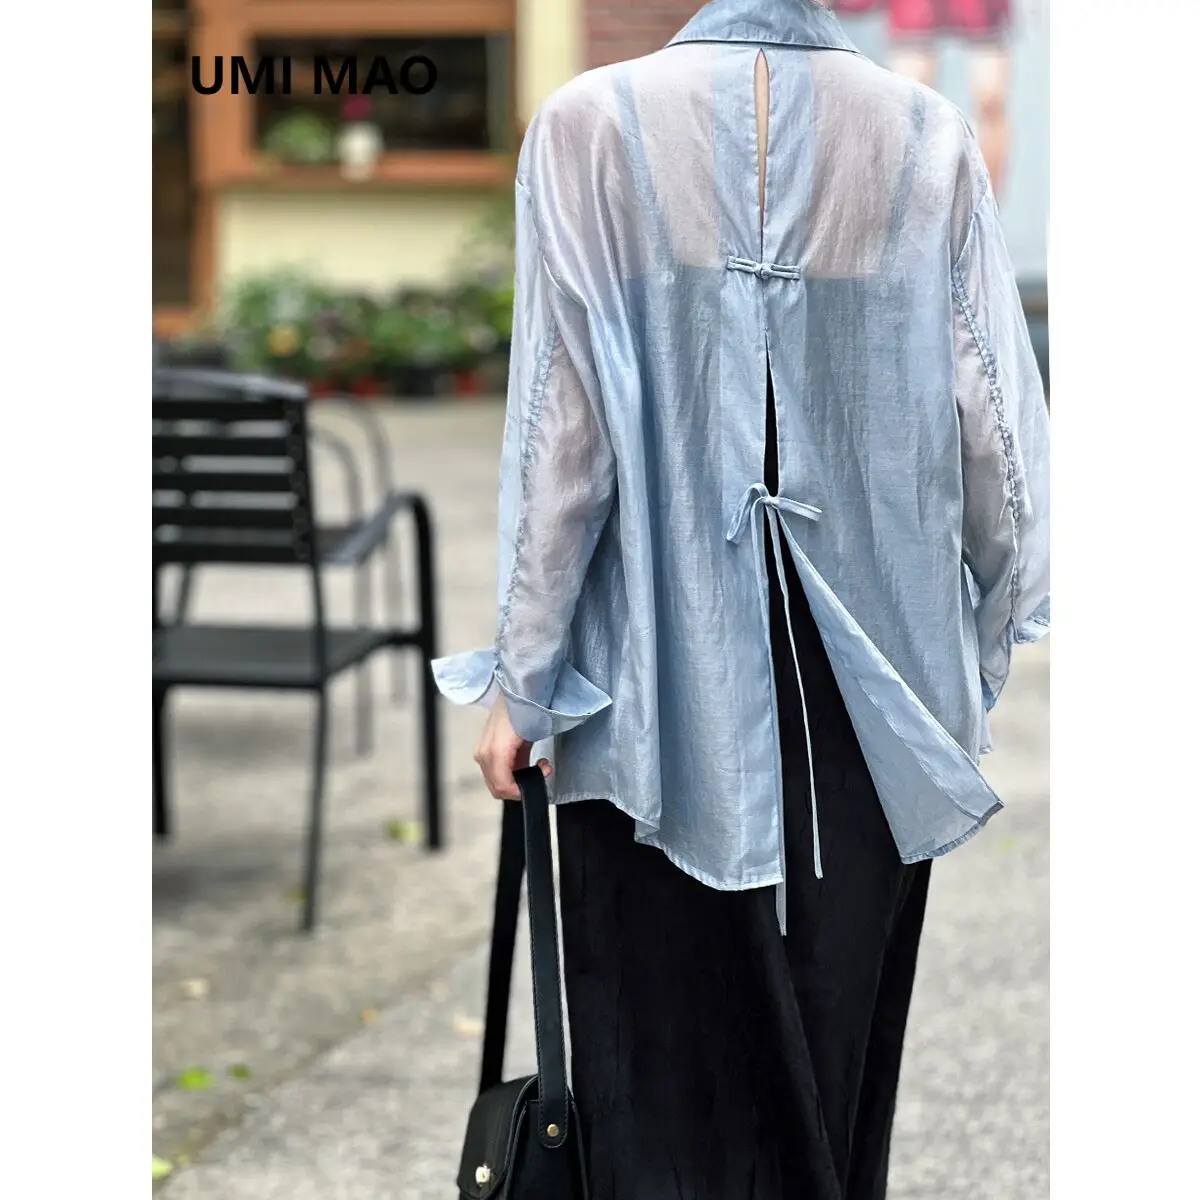 

UMI MAO New Chinese Style Buckle Back Slit Lace Up Sun Protection Shirt For Women's Summer Lightweight Tencel Loose Top Femme